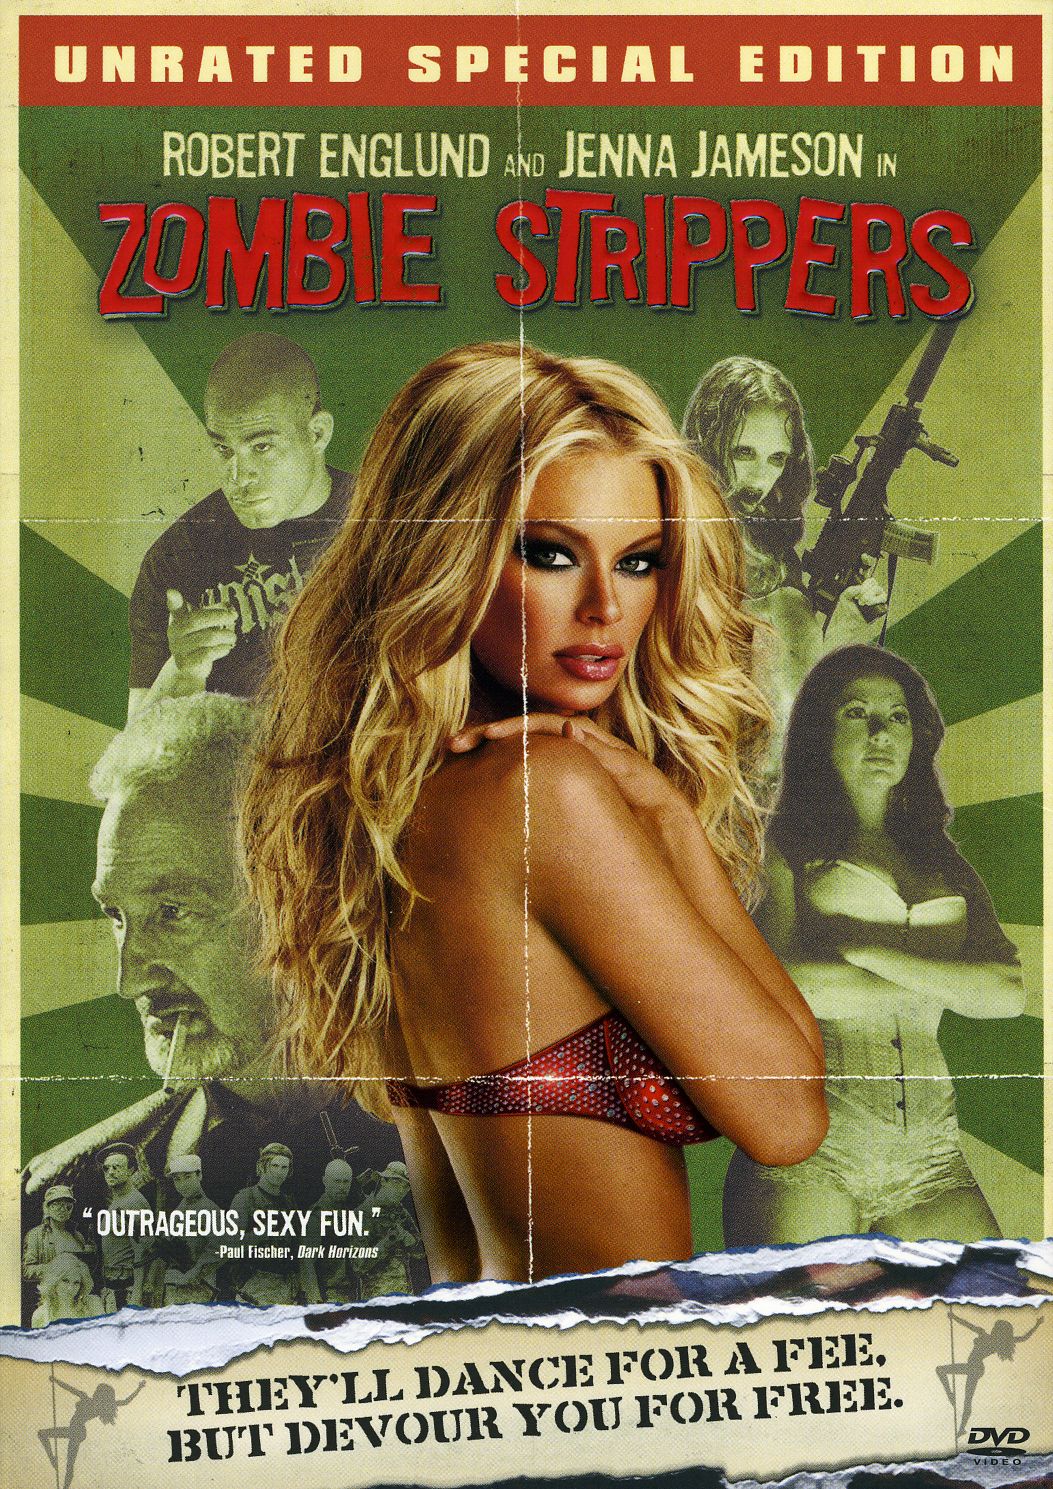 Zombie Strippers (Unrated Special Edition) (DVD) - Free ...